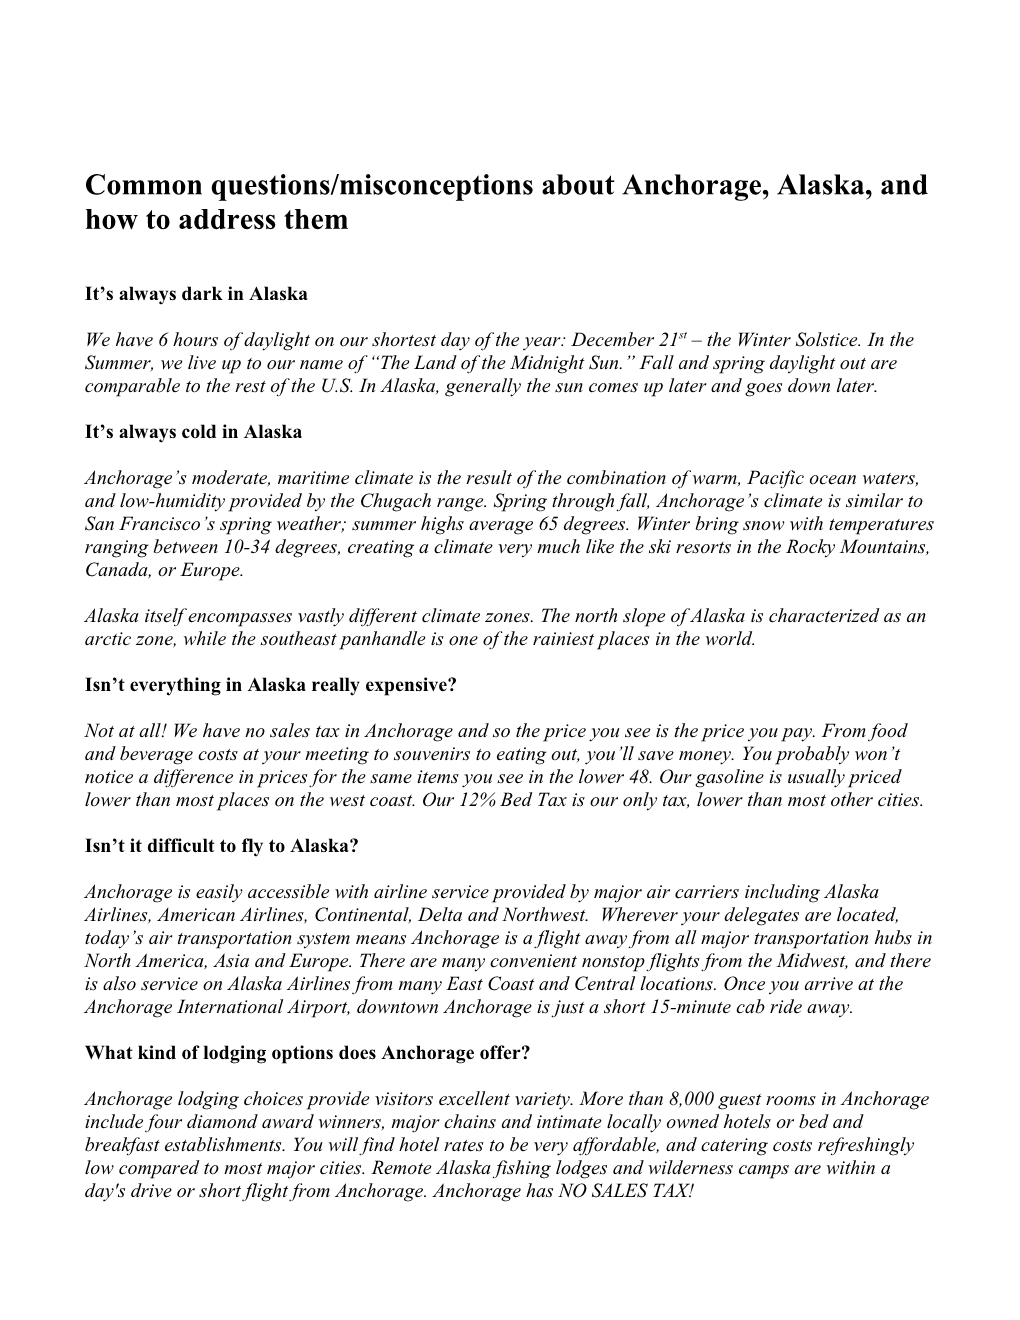 Common Questions/Misconceptions About Anchorage, Alaska, and How to Address Them